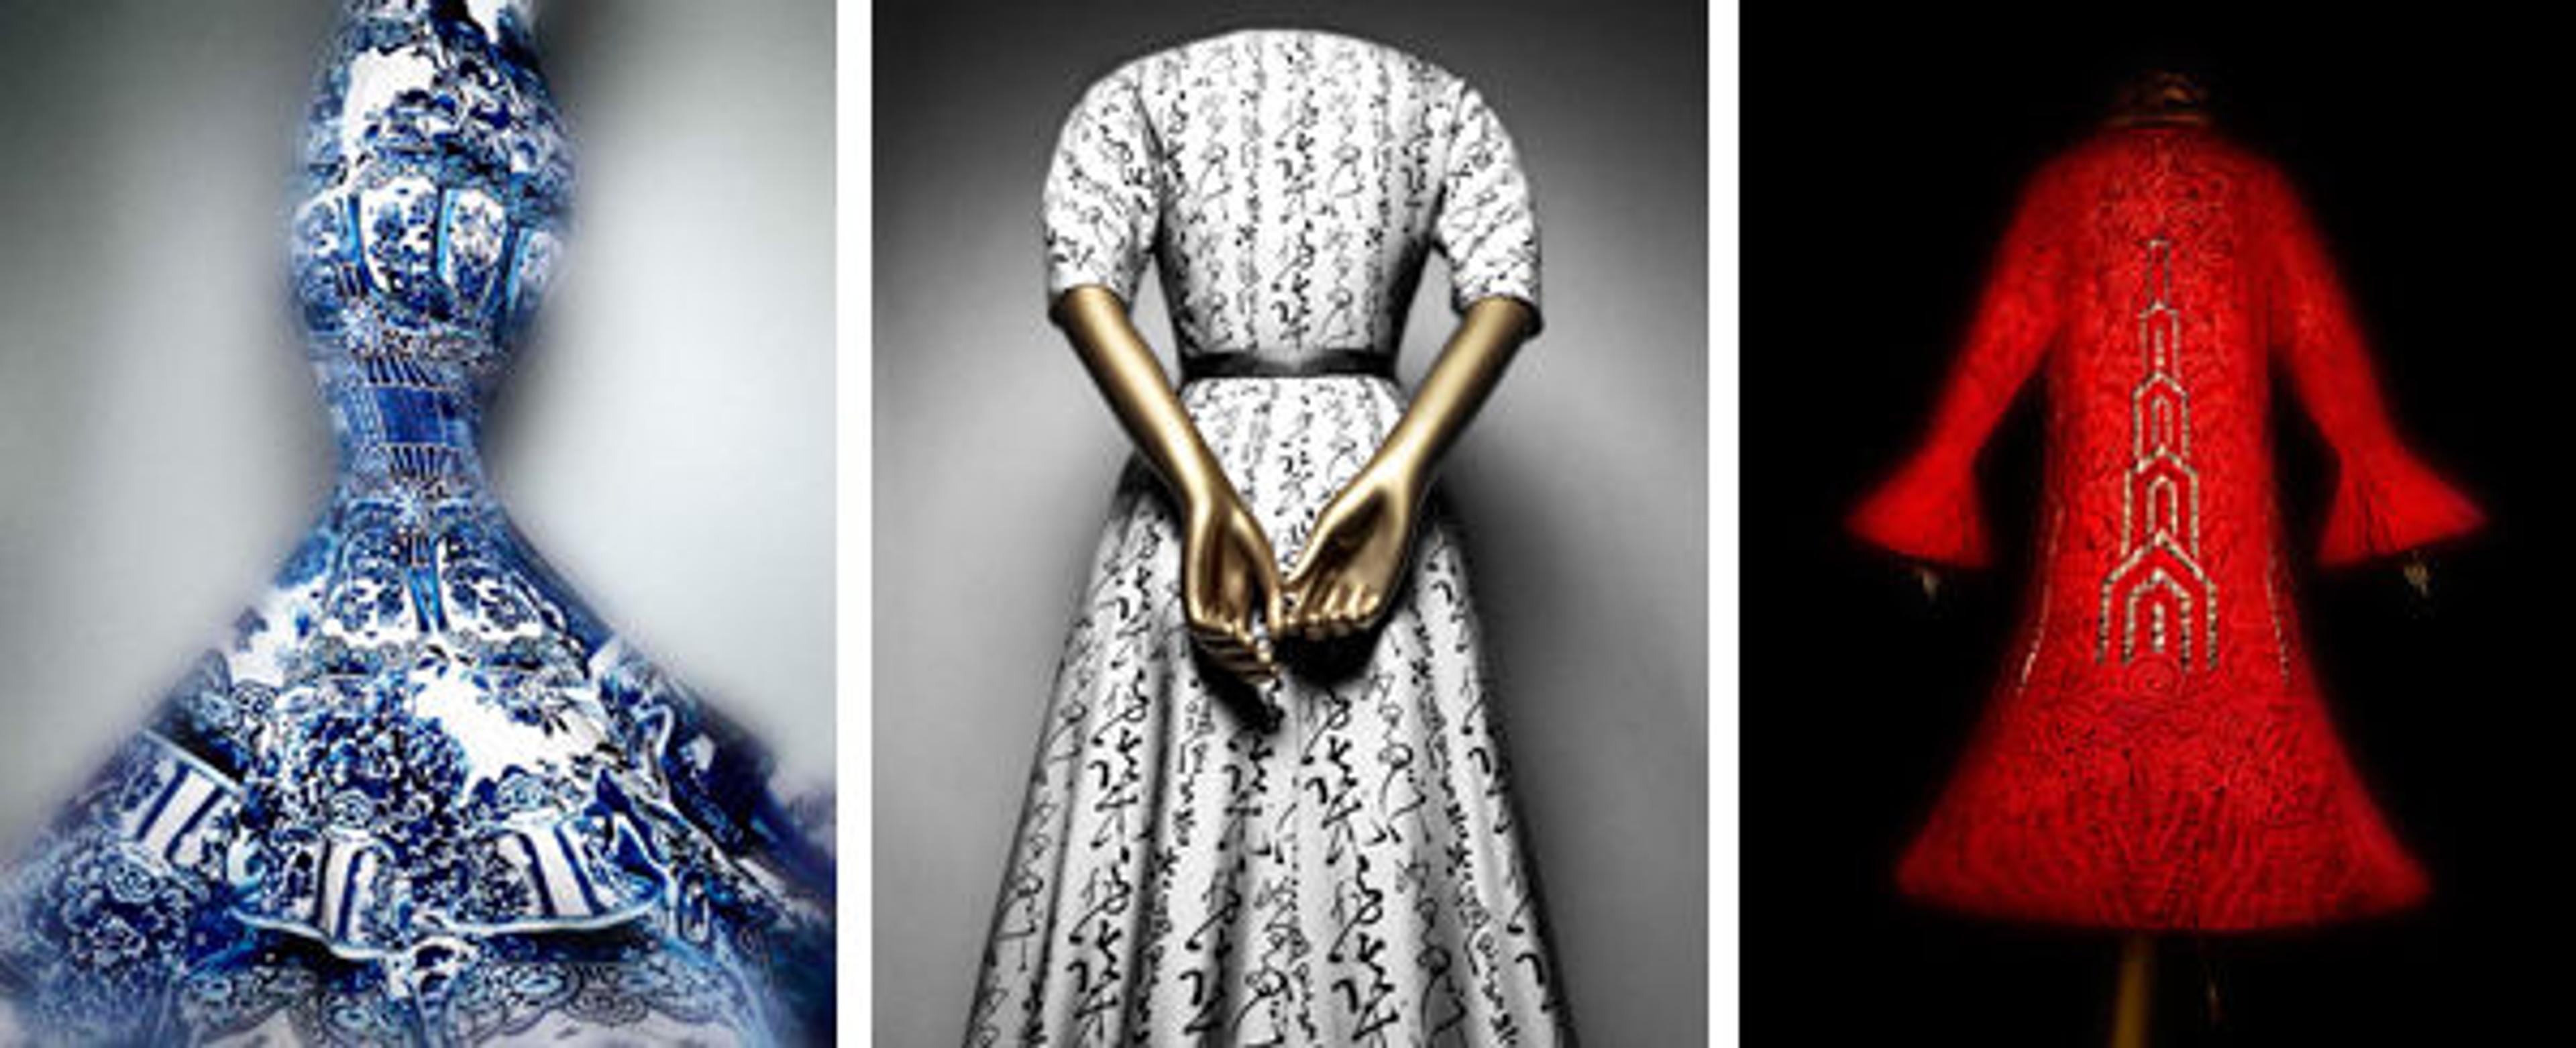 (left to right): Roberto Cavalli (Italian, born 1940) Evening dress, fall/winter 2005–6; Christian Dior (French, 1905–1957) for House of Dior (French, founded 1947) "Quiproquo" cocktail dress, 1951 French. Silk, leather. The Metropolitan Museum of Art, New York, Gift of Mrs. Byron C. Foy, 1953 (C.I.53.40.38a–d); Evening coat, ca. 1925. French. Silk, fur, metal. Brooklyn Museum Costume Collection at The Metropolitan Museum of Art, Gift of the Brooklyn Museum, 2009; Gift of Mrs. Robert S. Kilborne, 1958 (2009.300.259). Photography © Platon